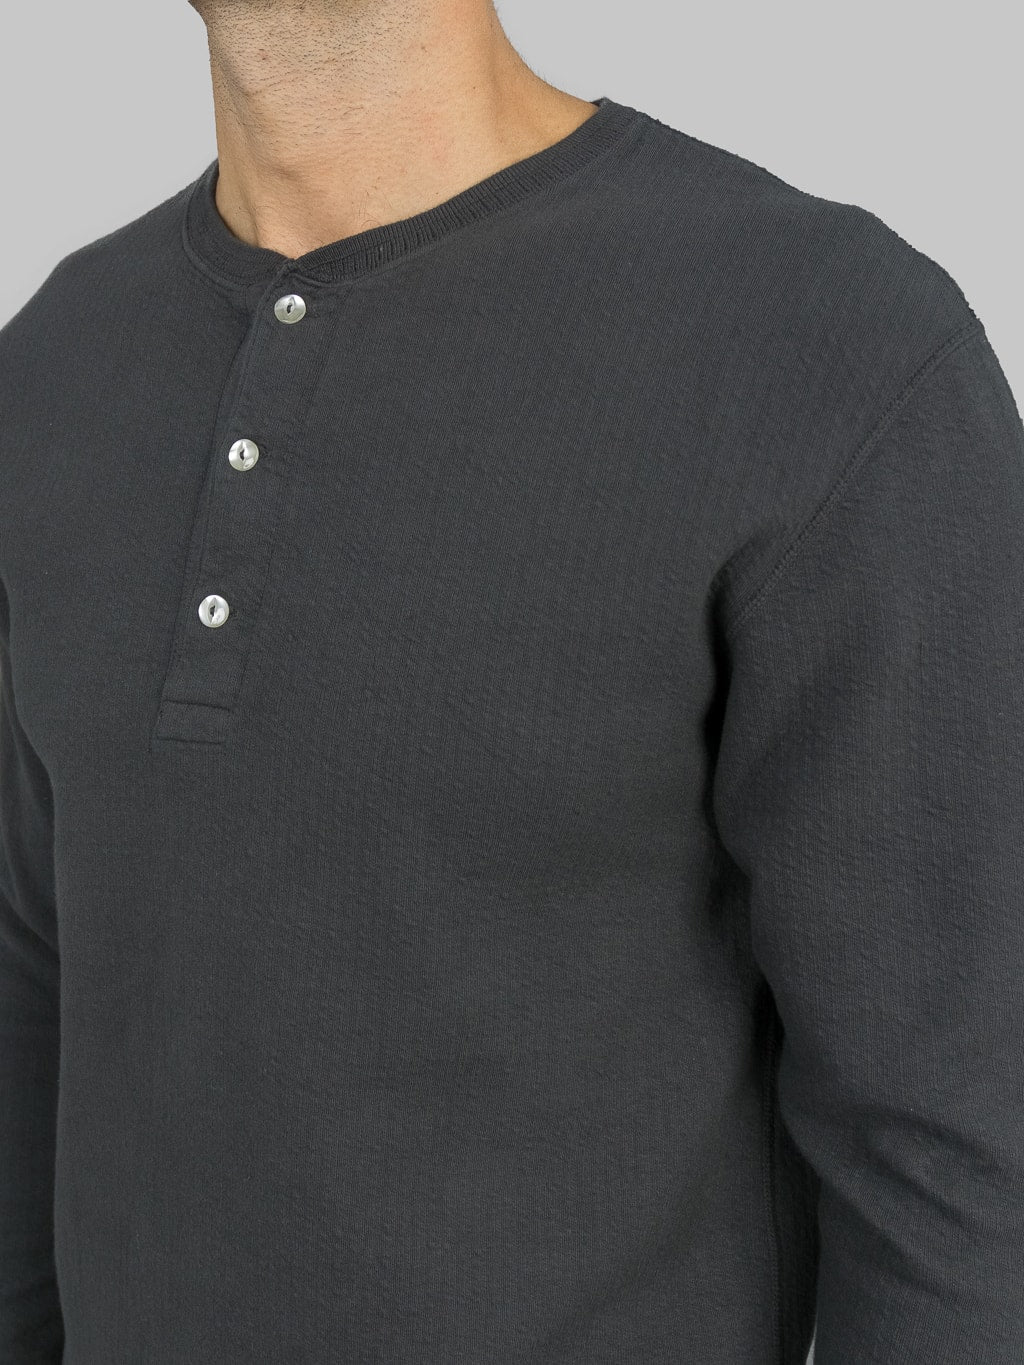 Loop Weft Double Face Jacquard henley Thermal antique black collar buttons